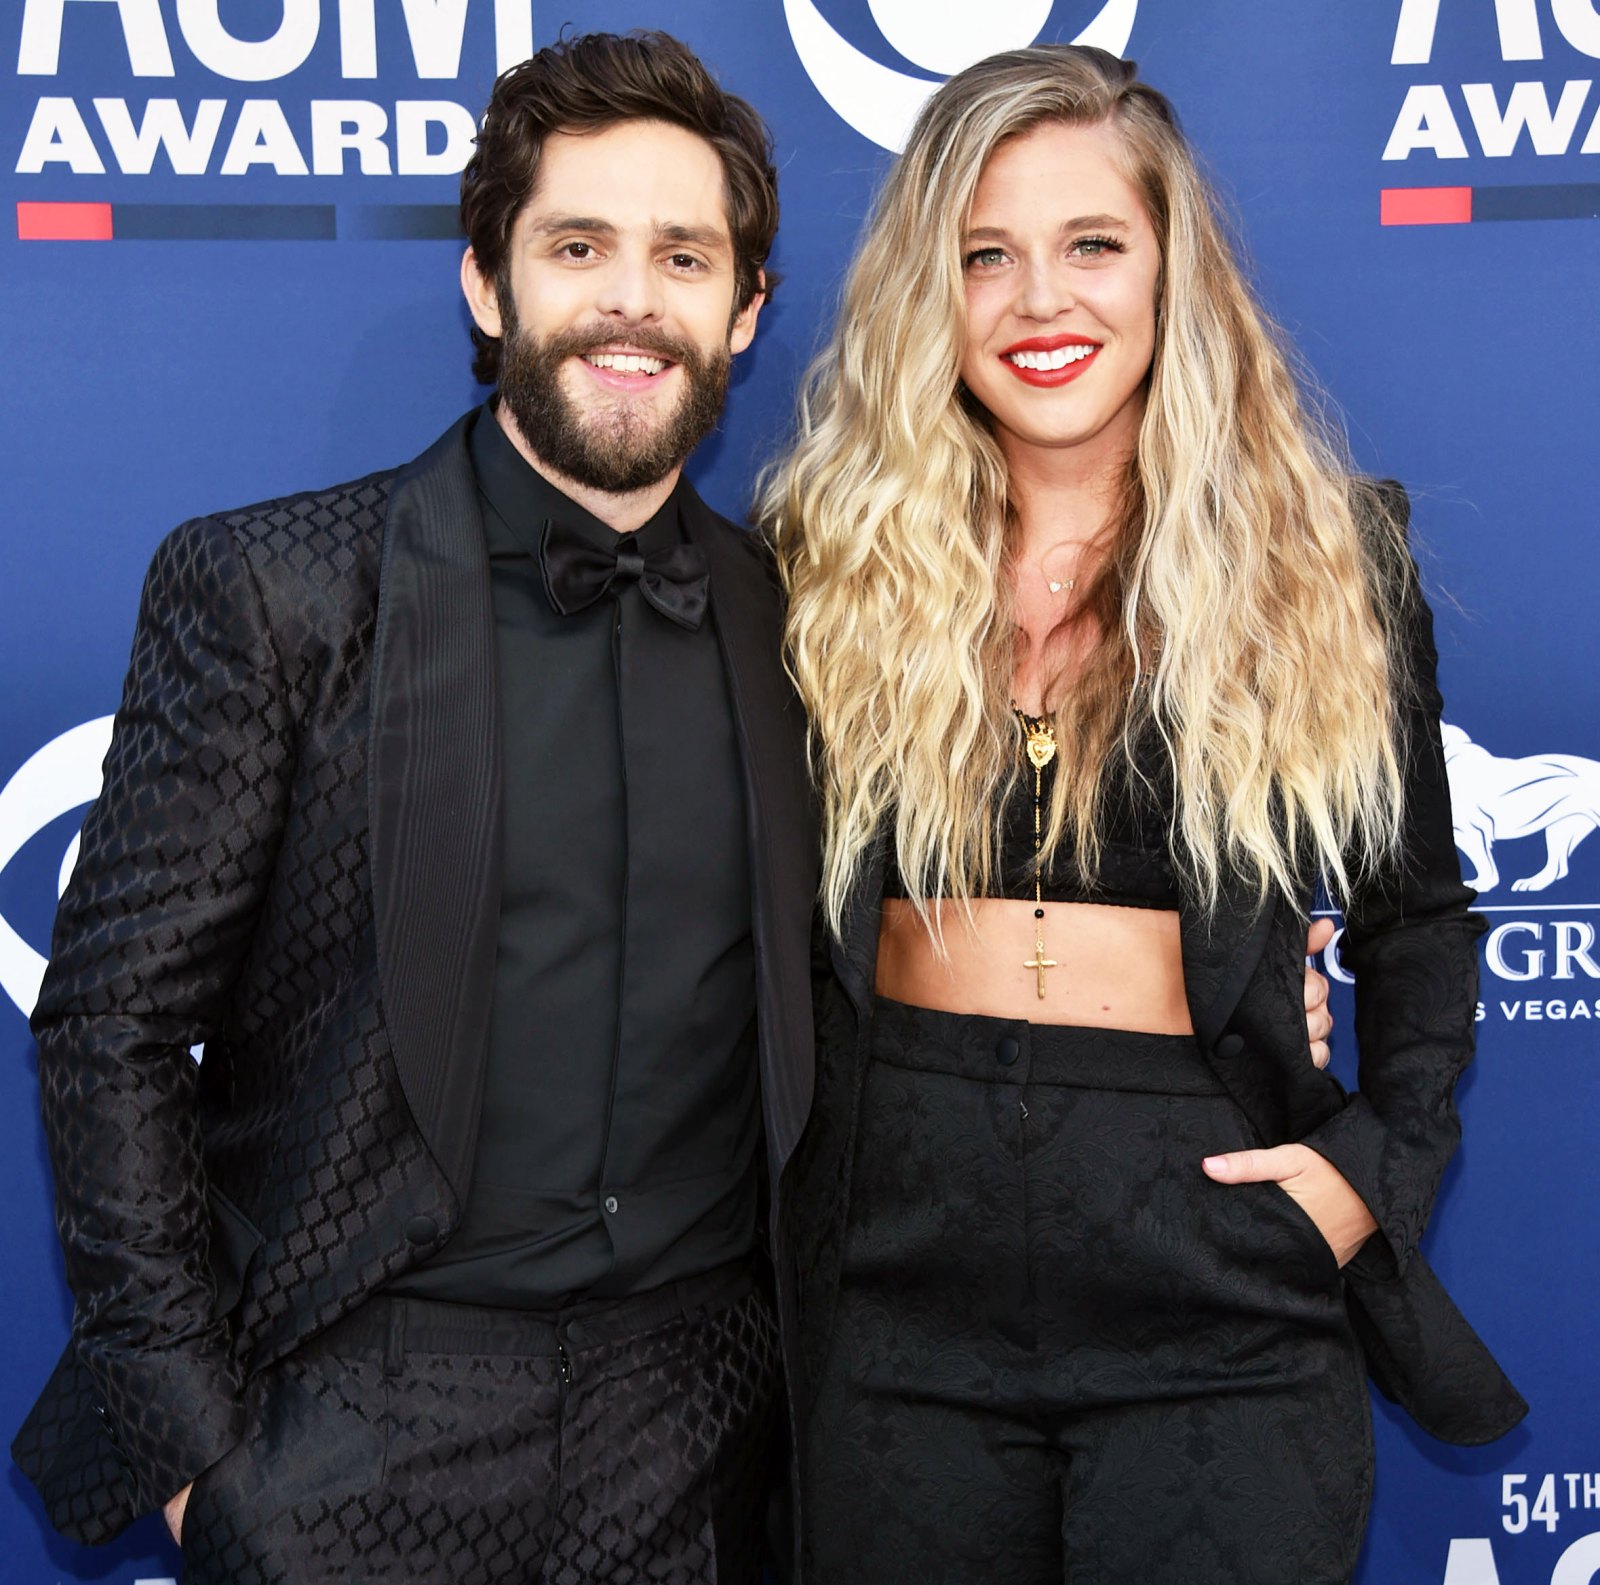 Thomas Rhett’s Wife Lauren Akins Is Pregnant with Baby Number. 3